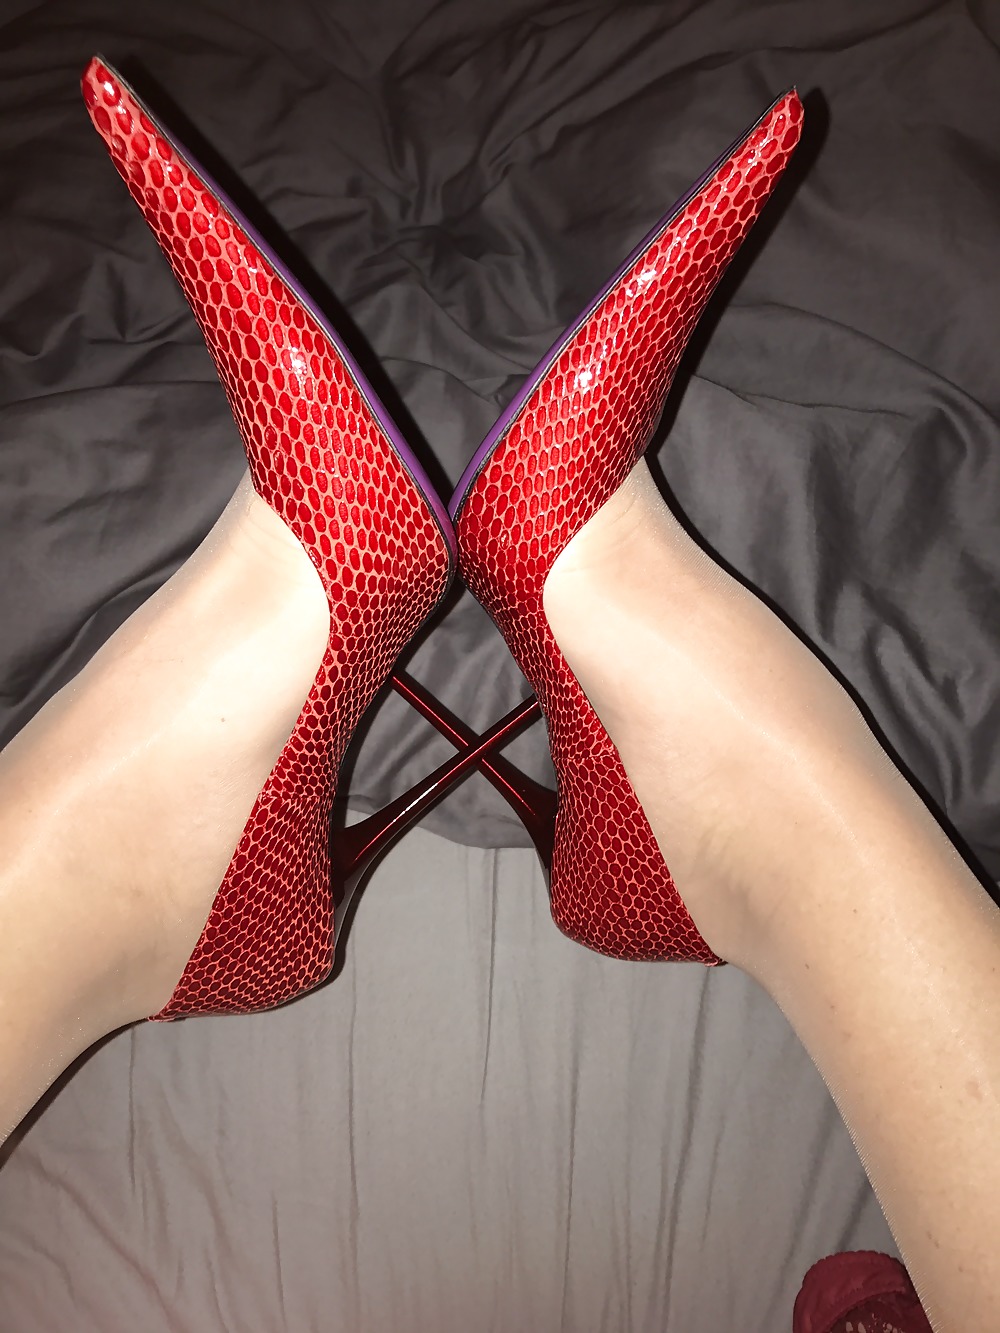 XXX Sexy legs in nylons and high heels